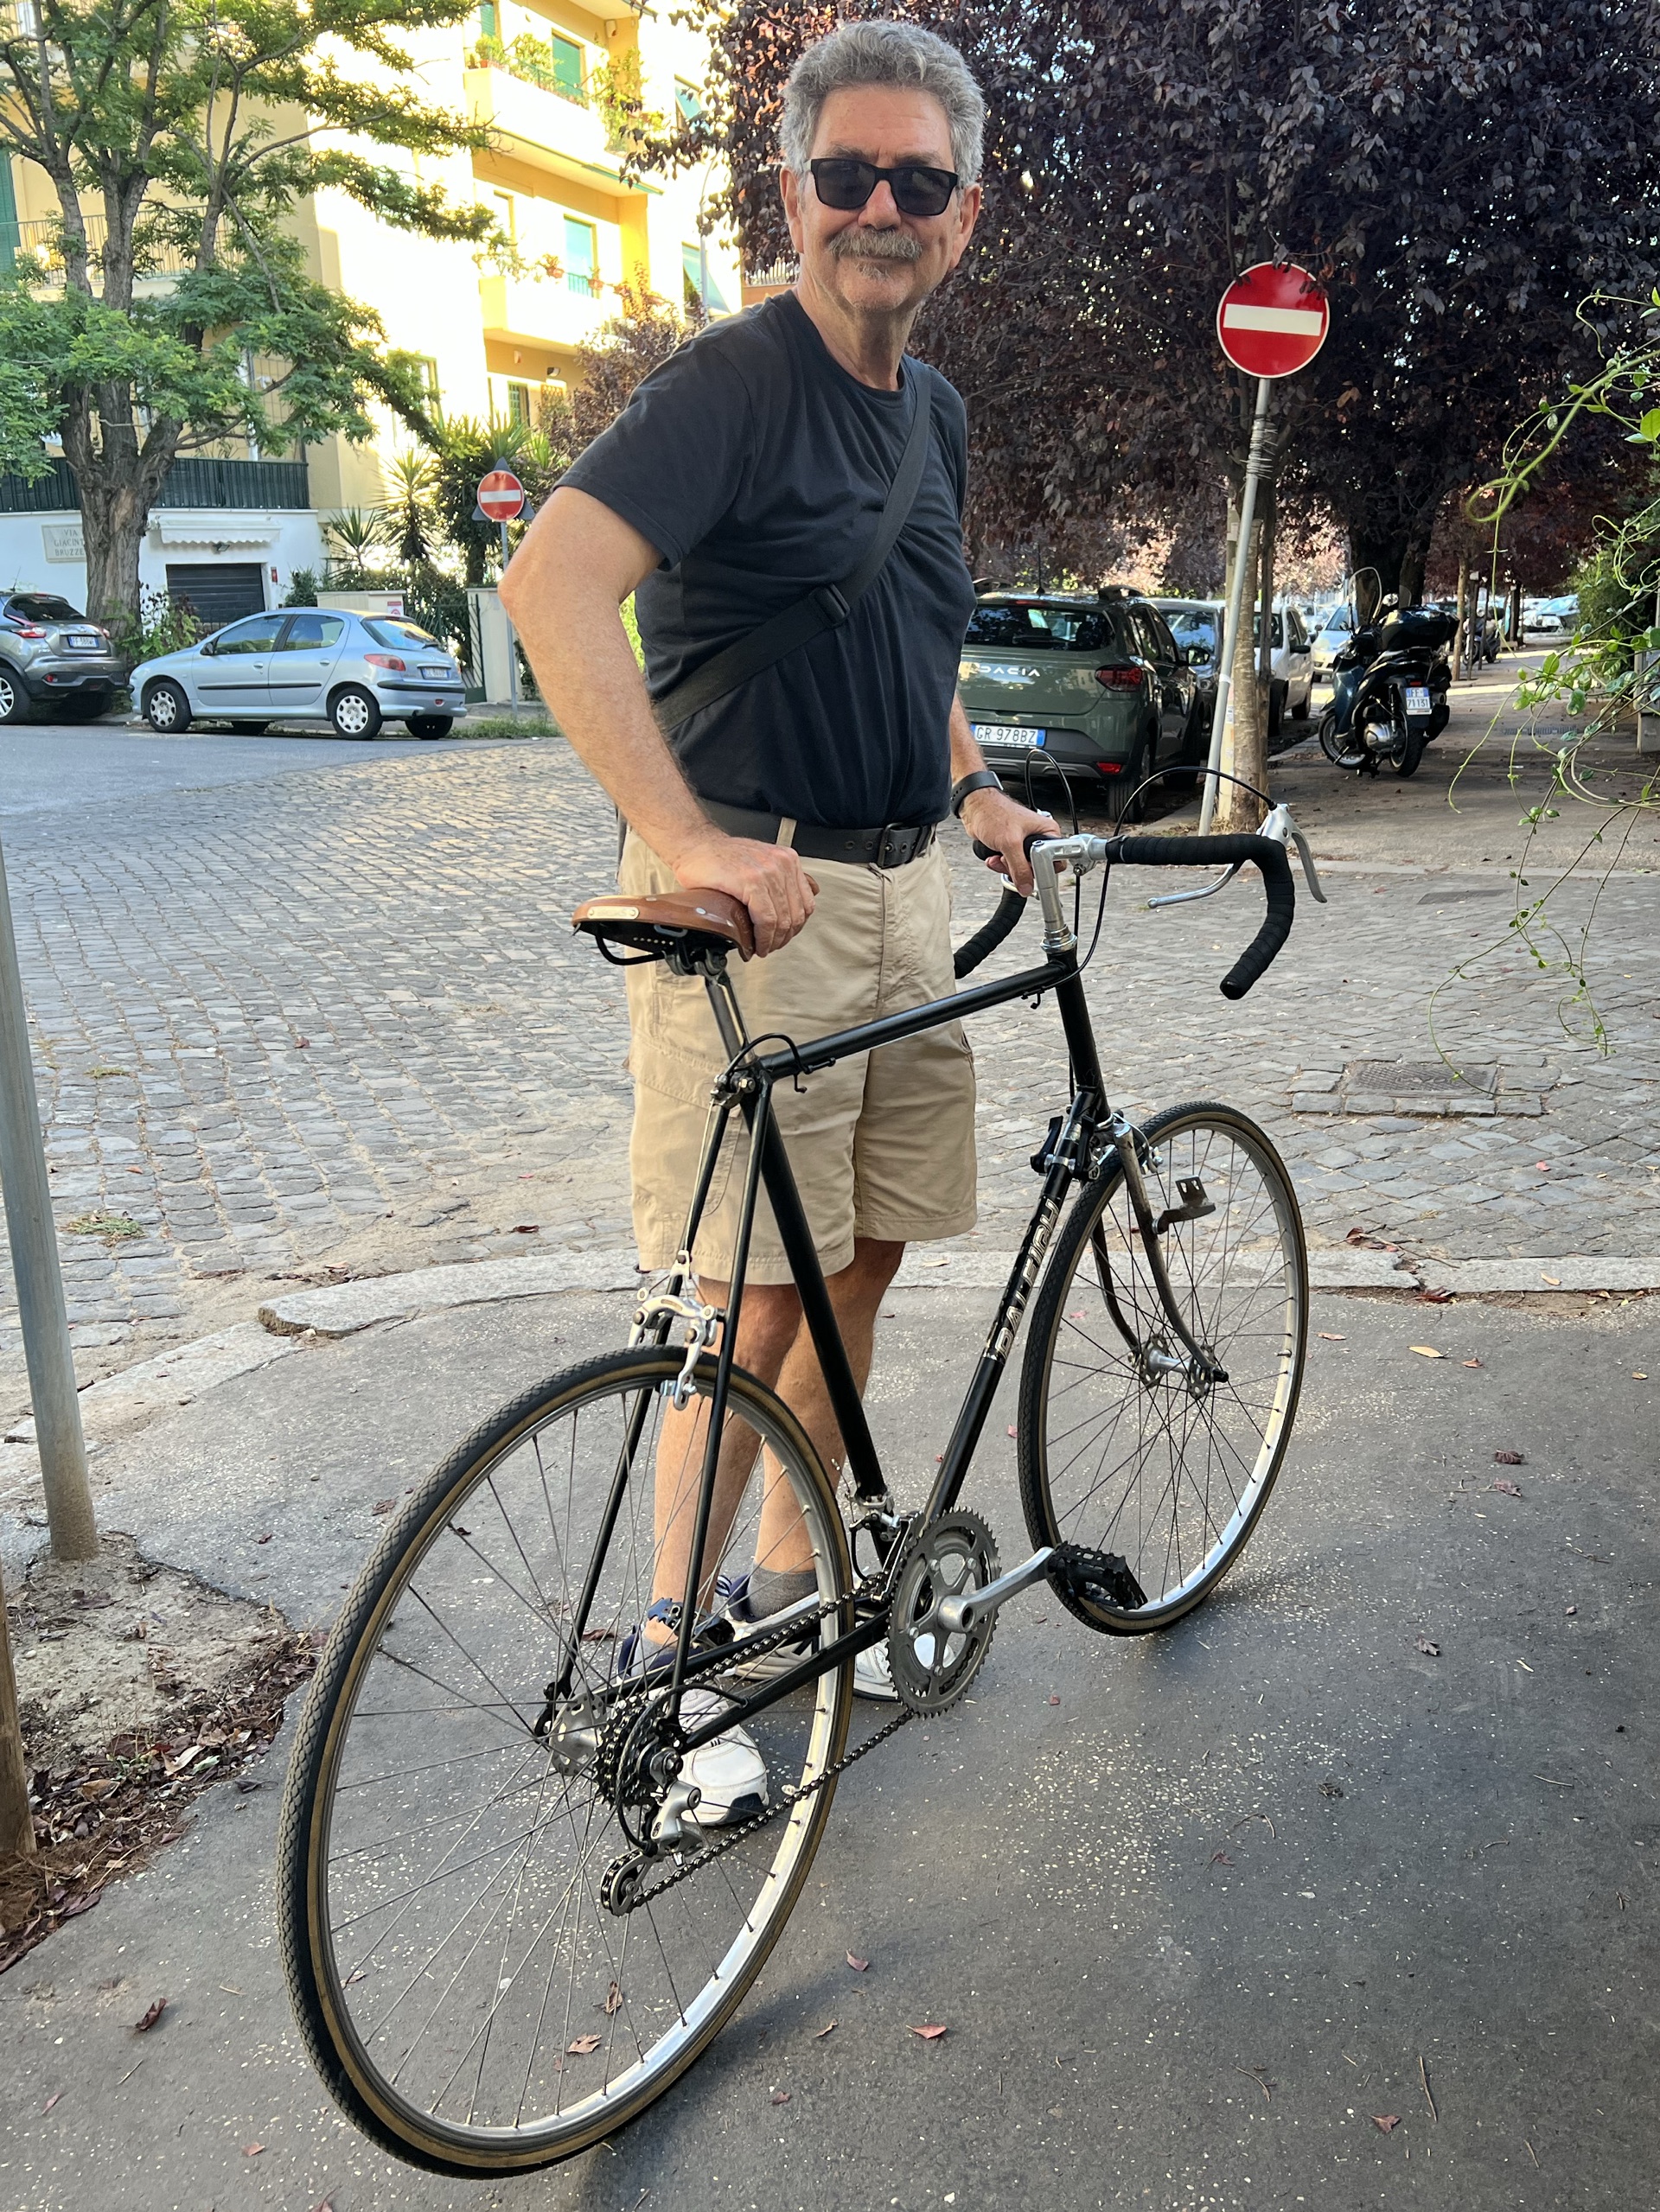 Me, wearing a black T-shirt and bown shorts, standing holding my refurbished Raleigh supressing almost idiotic grin.